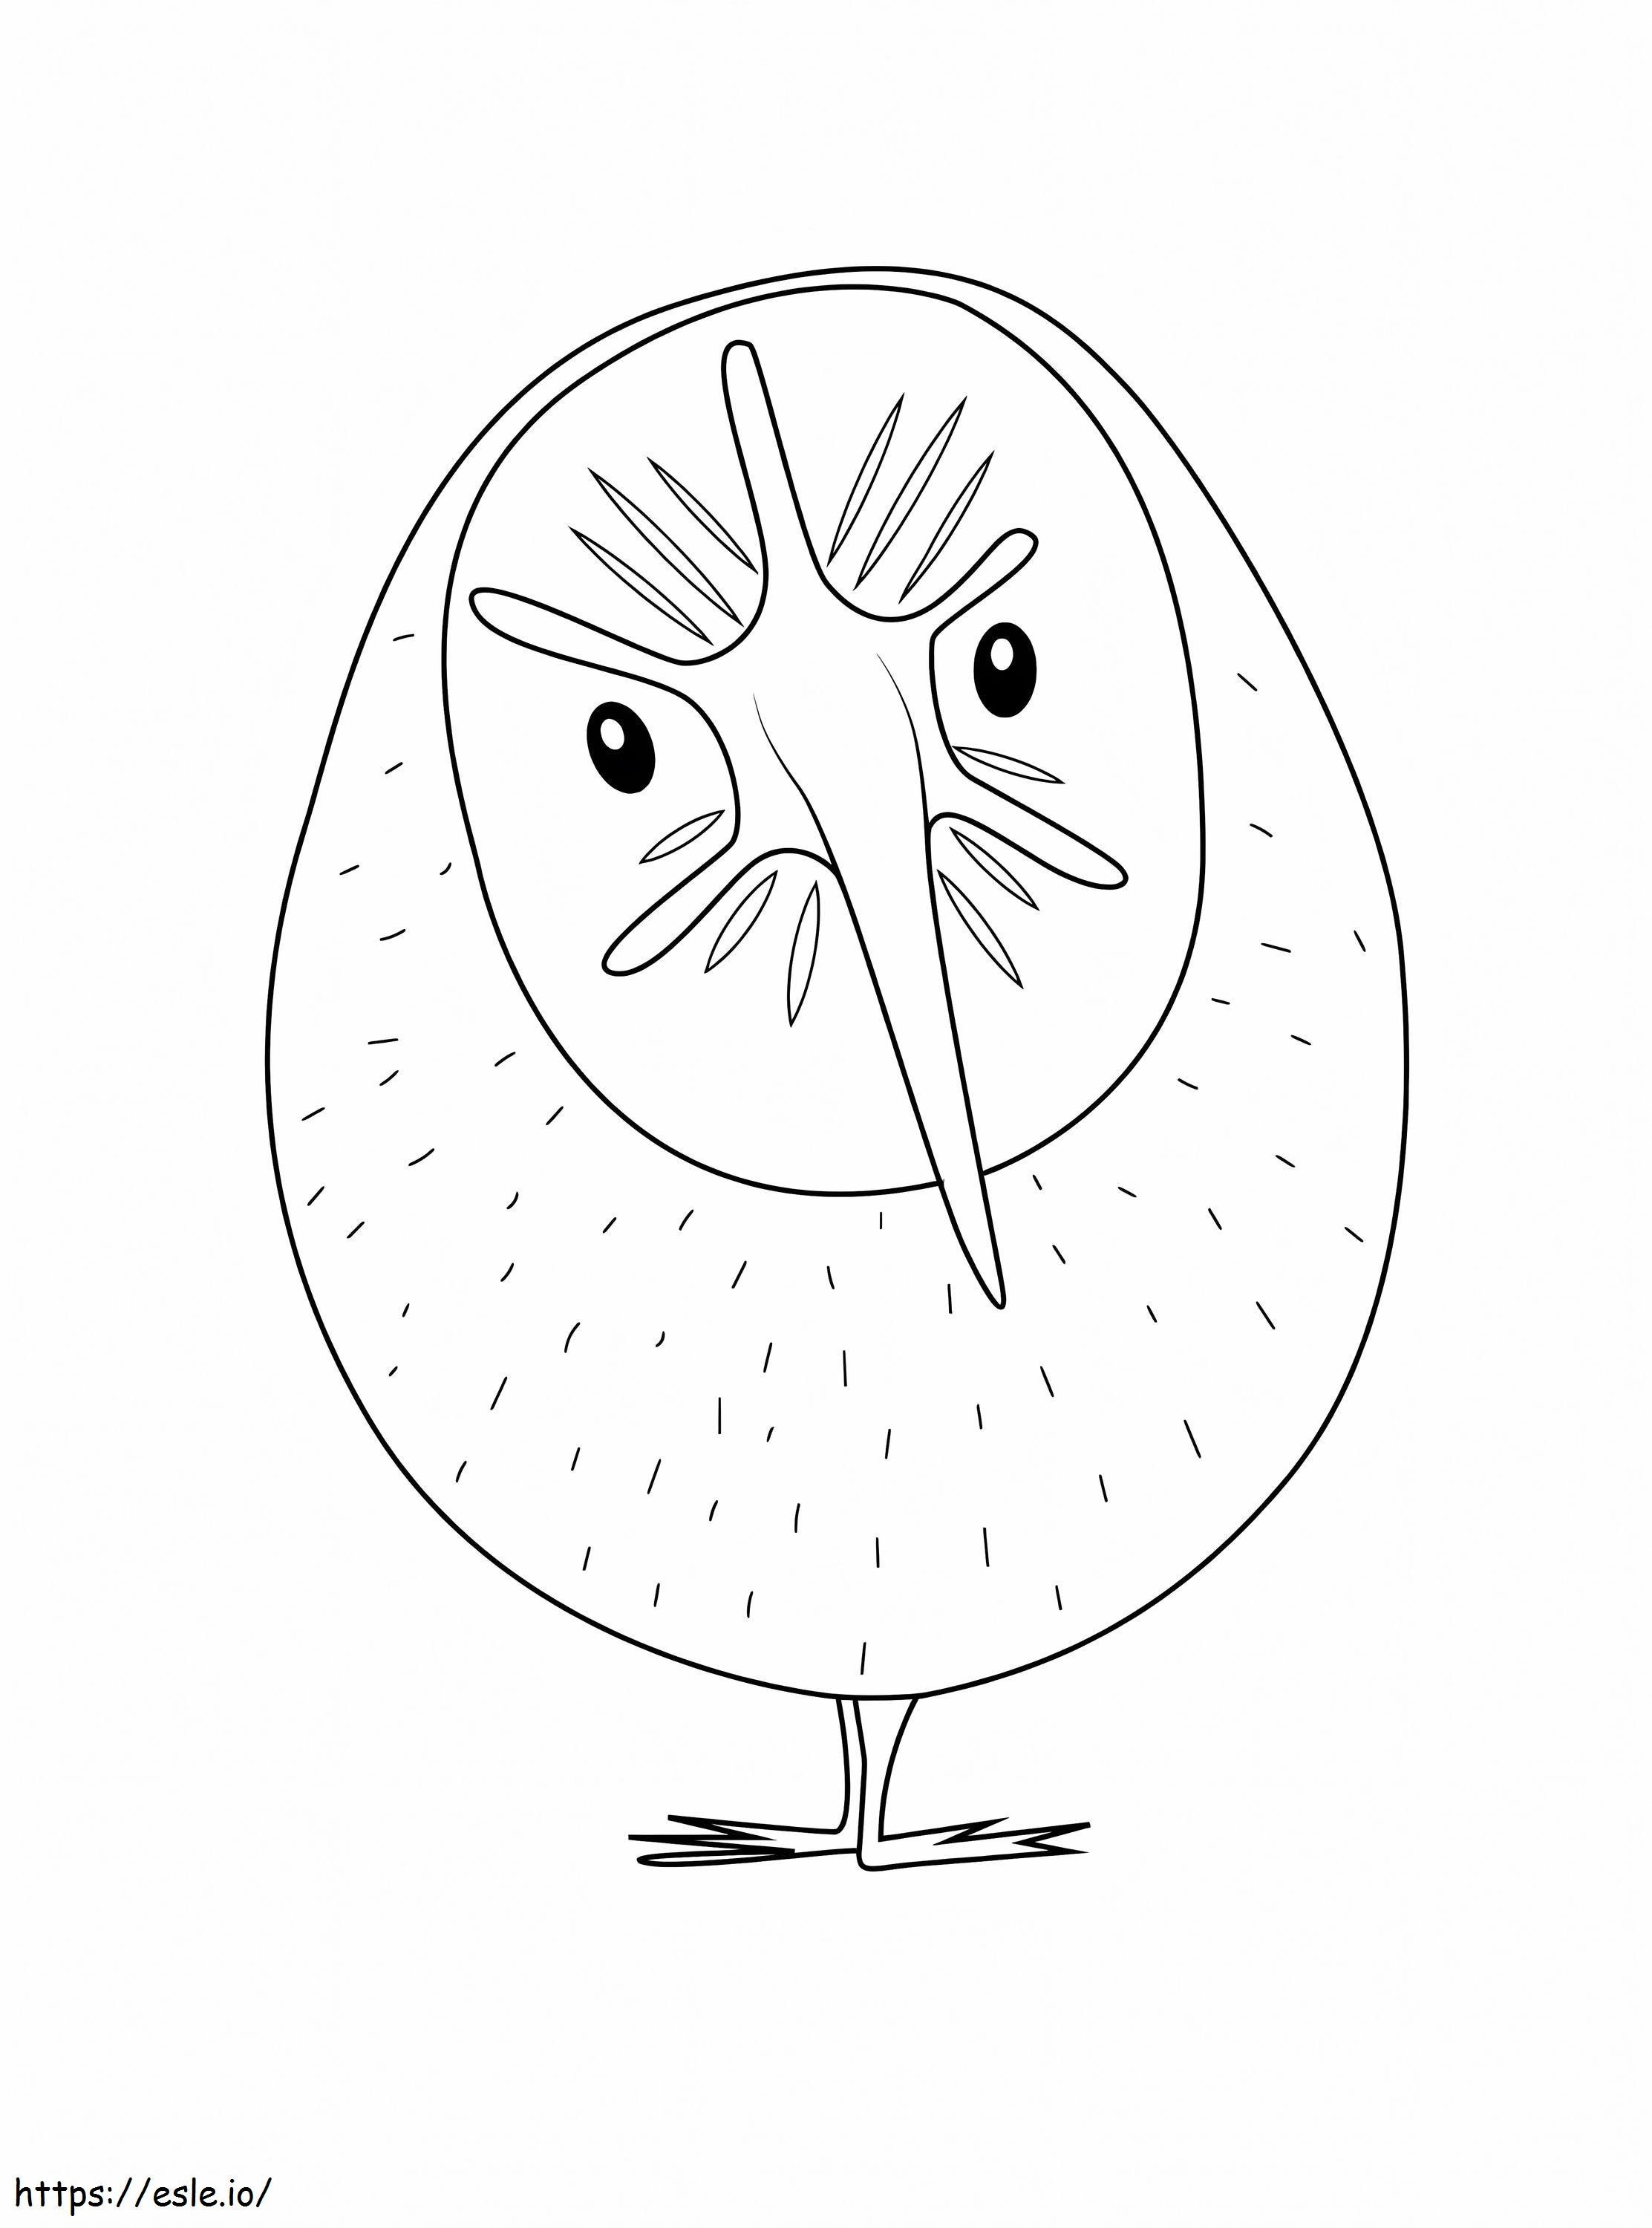 Cloudy Kiwi With A Chance Of Meatballs coloring page